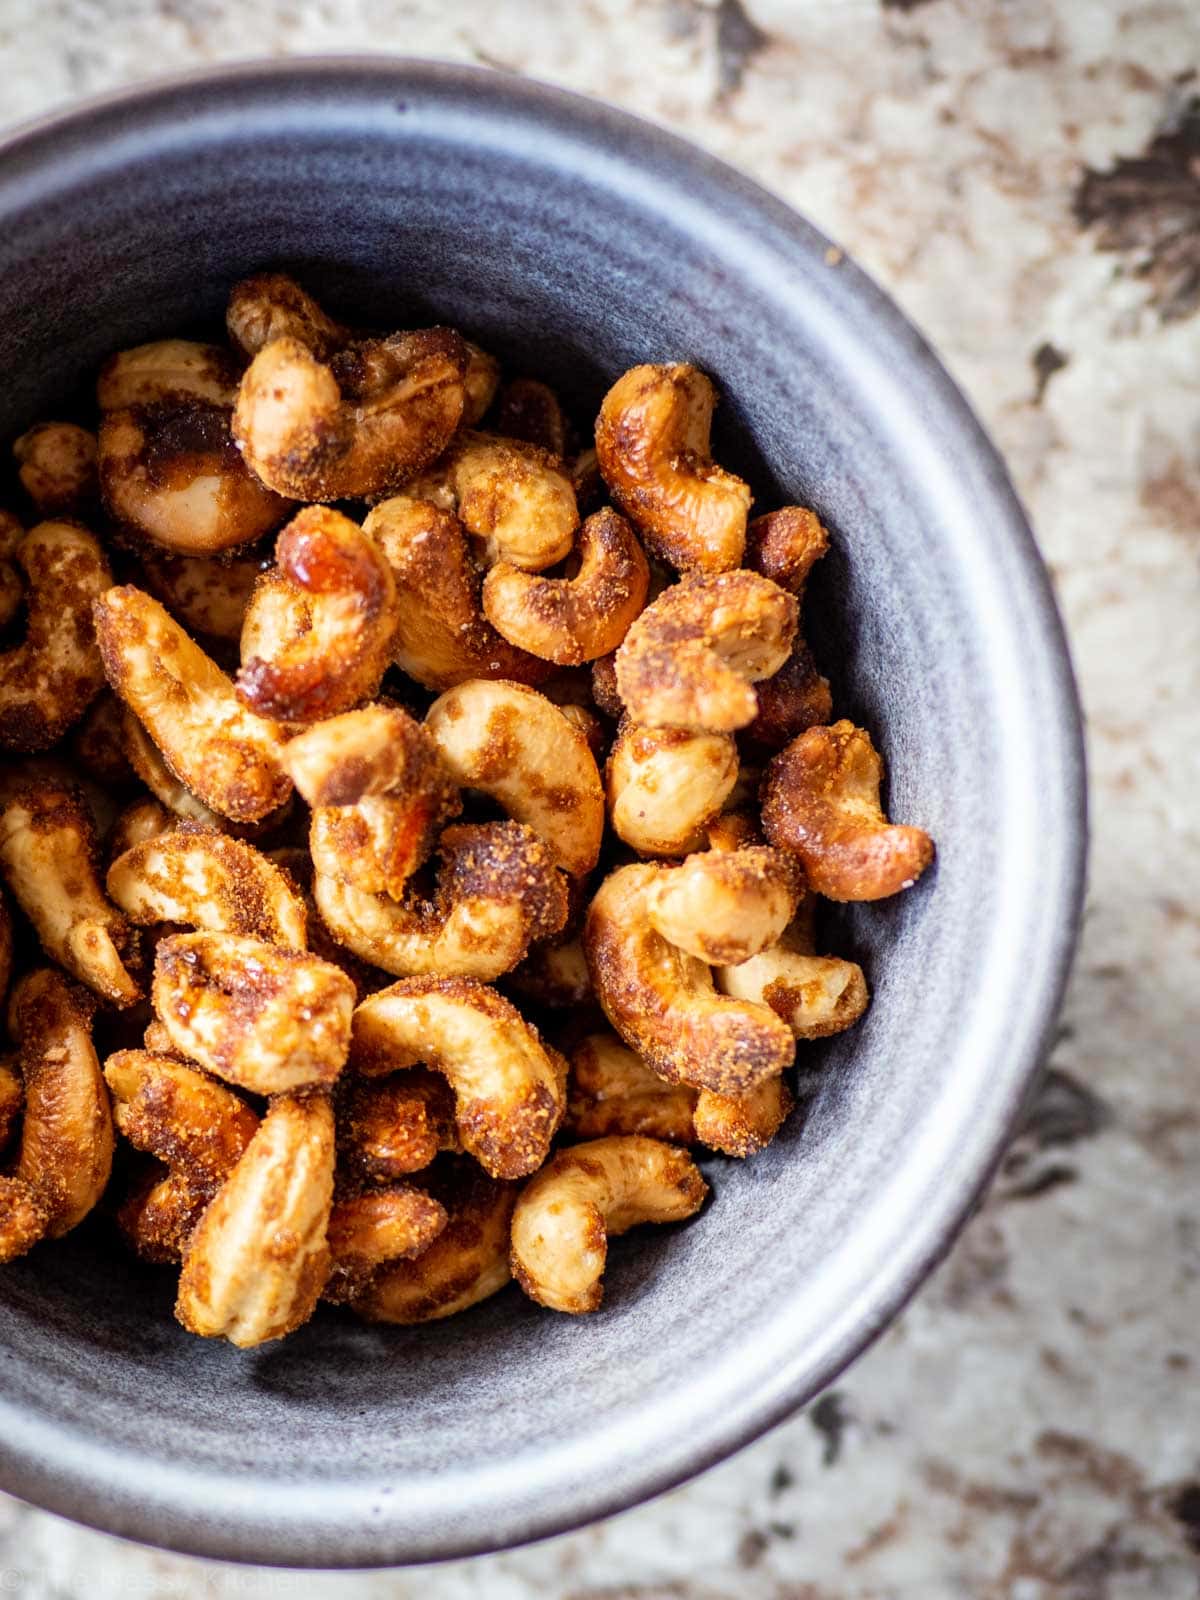 A grey stone bowl filled with honey roasted cashews.